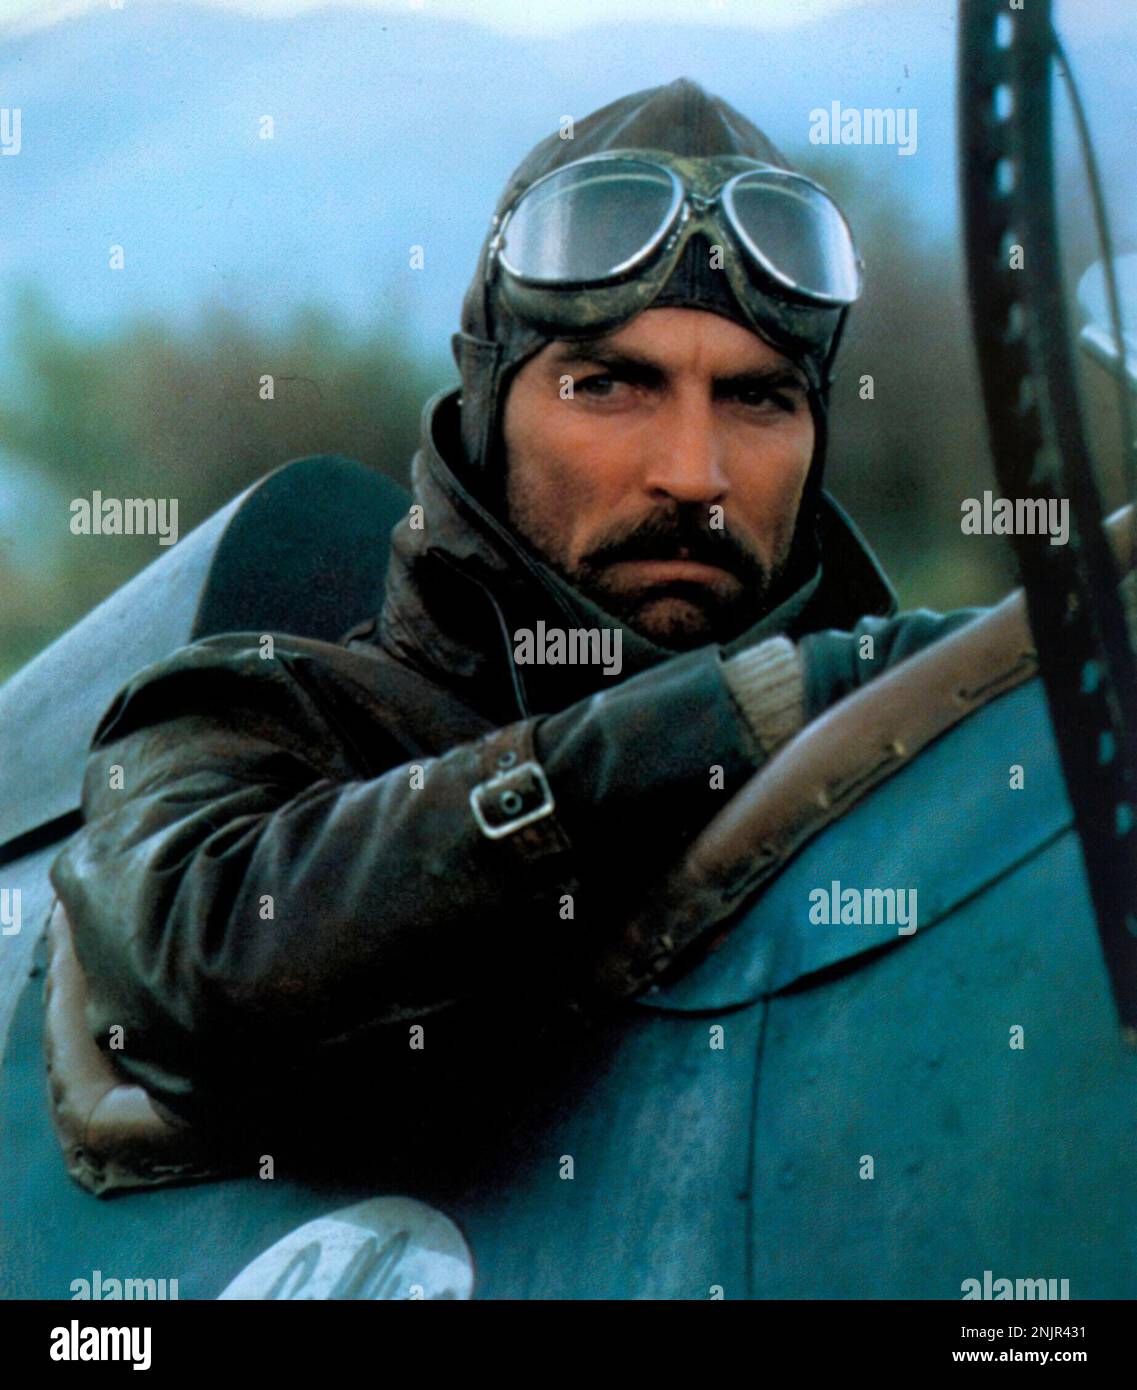 TOM SELLECK in HIGH ROAD TO CHINA (1983), directed by BRIAN G. HUTTON. Credit: GOLDEN HARVEST-JADRAN/WB / Album Stock Photo